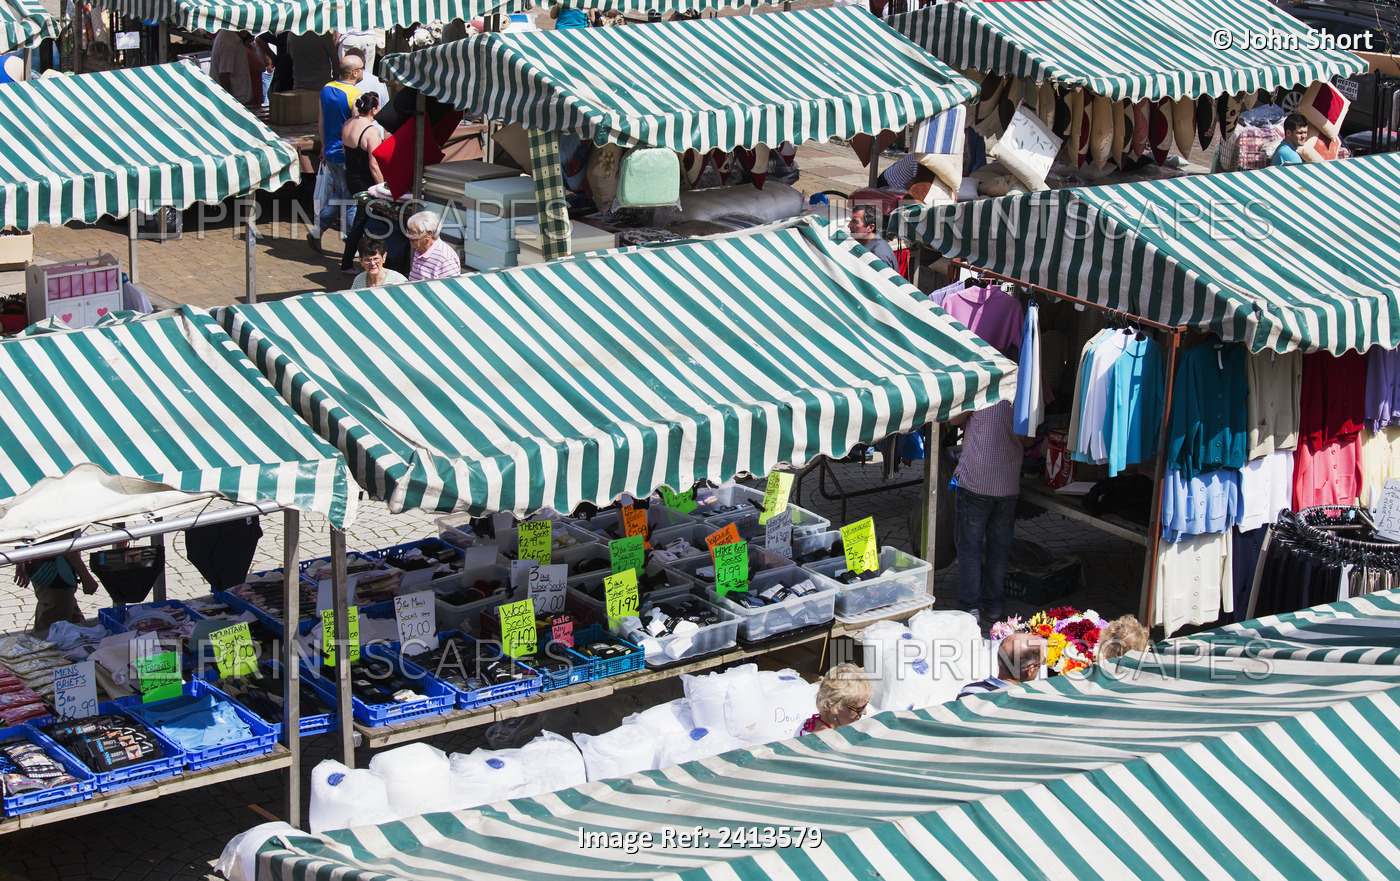 Tents In A Market Place; South Shields, Tyne And Wear, England